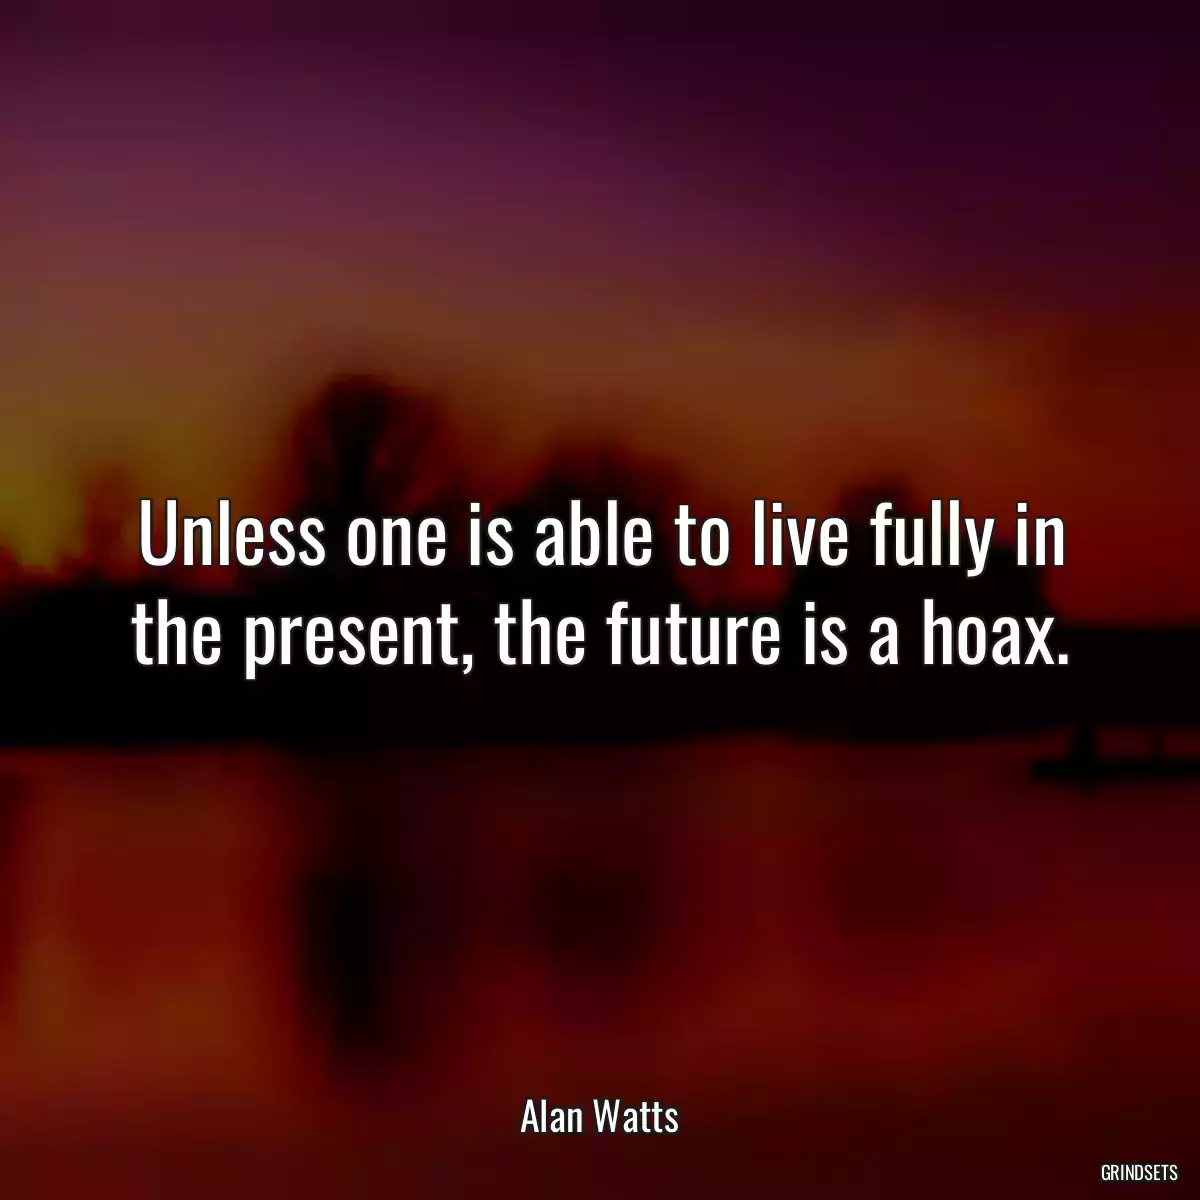 Unless one is able to live fully in the present, the future is a hoax.